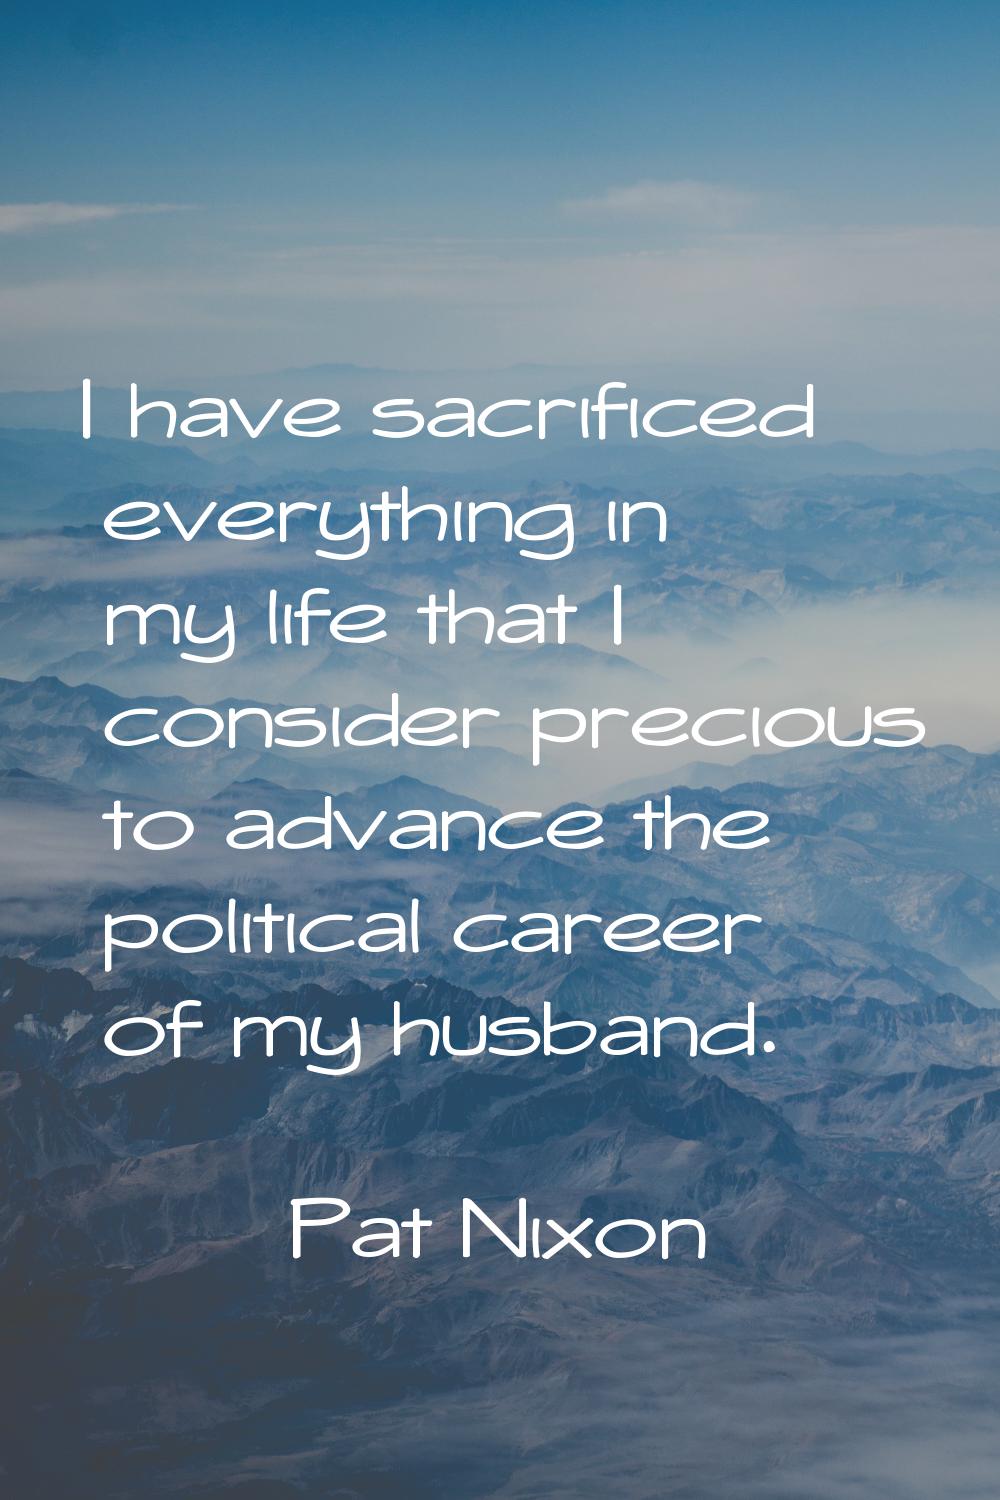 I have sacrificed everything in my life that I consider precious to advance the political career of